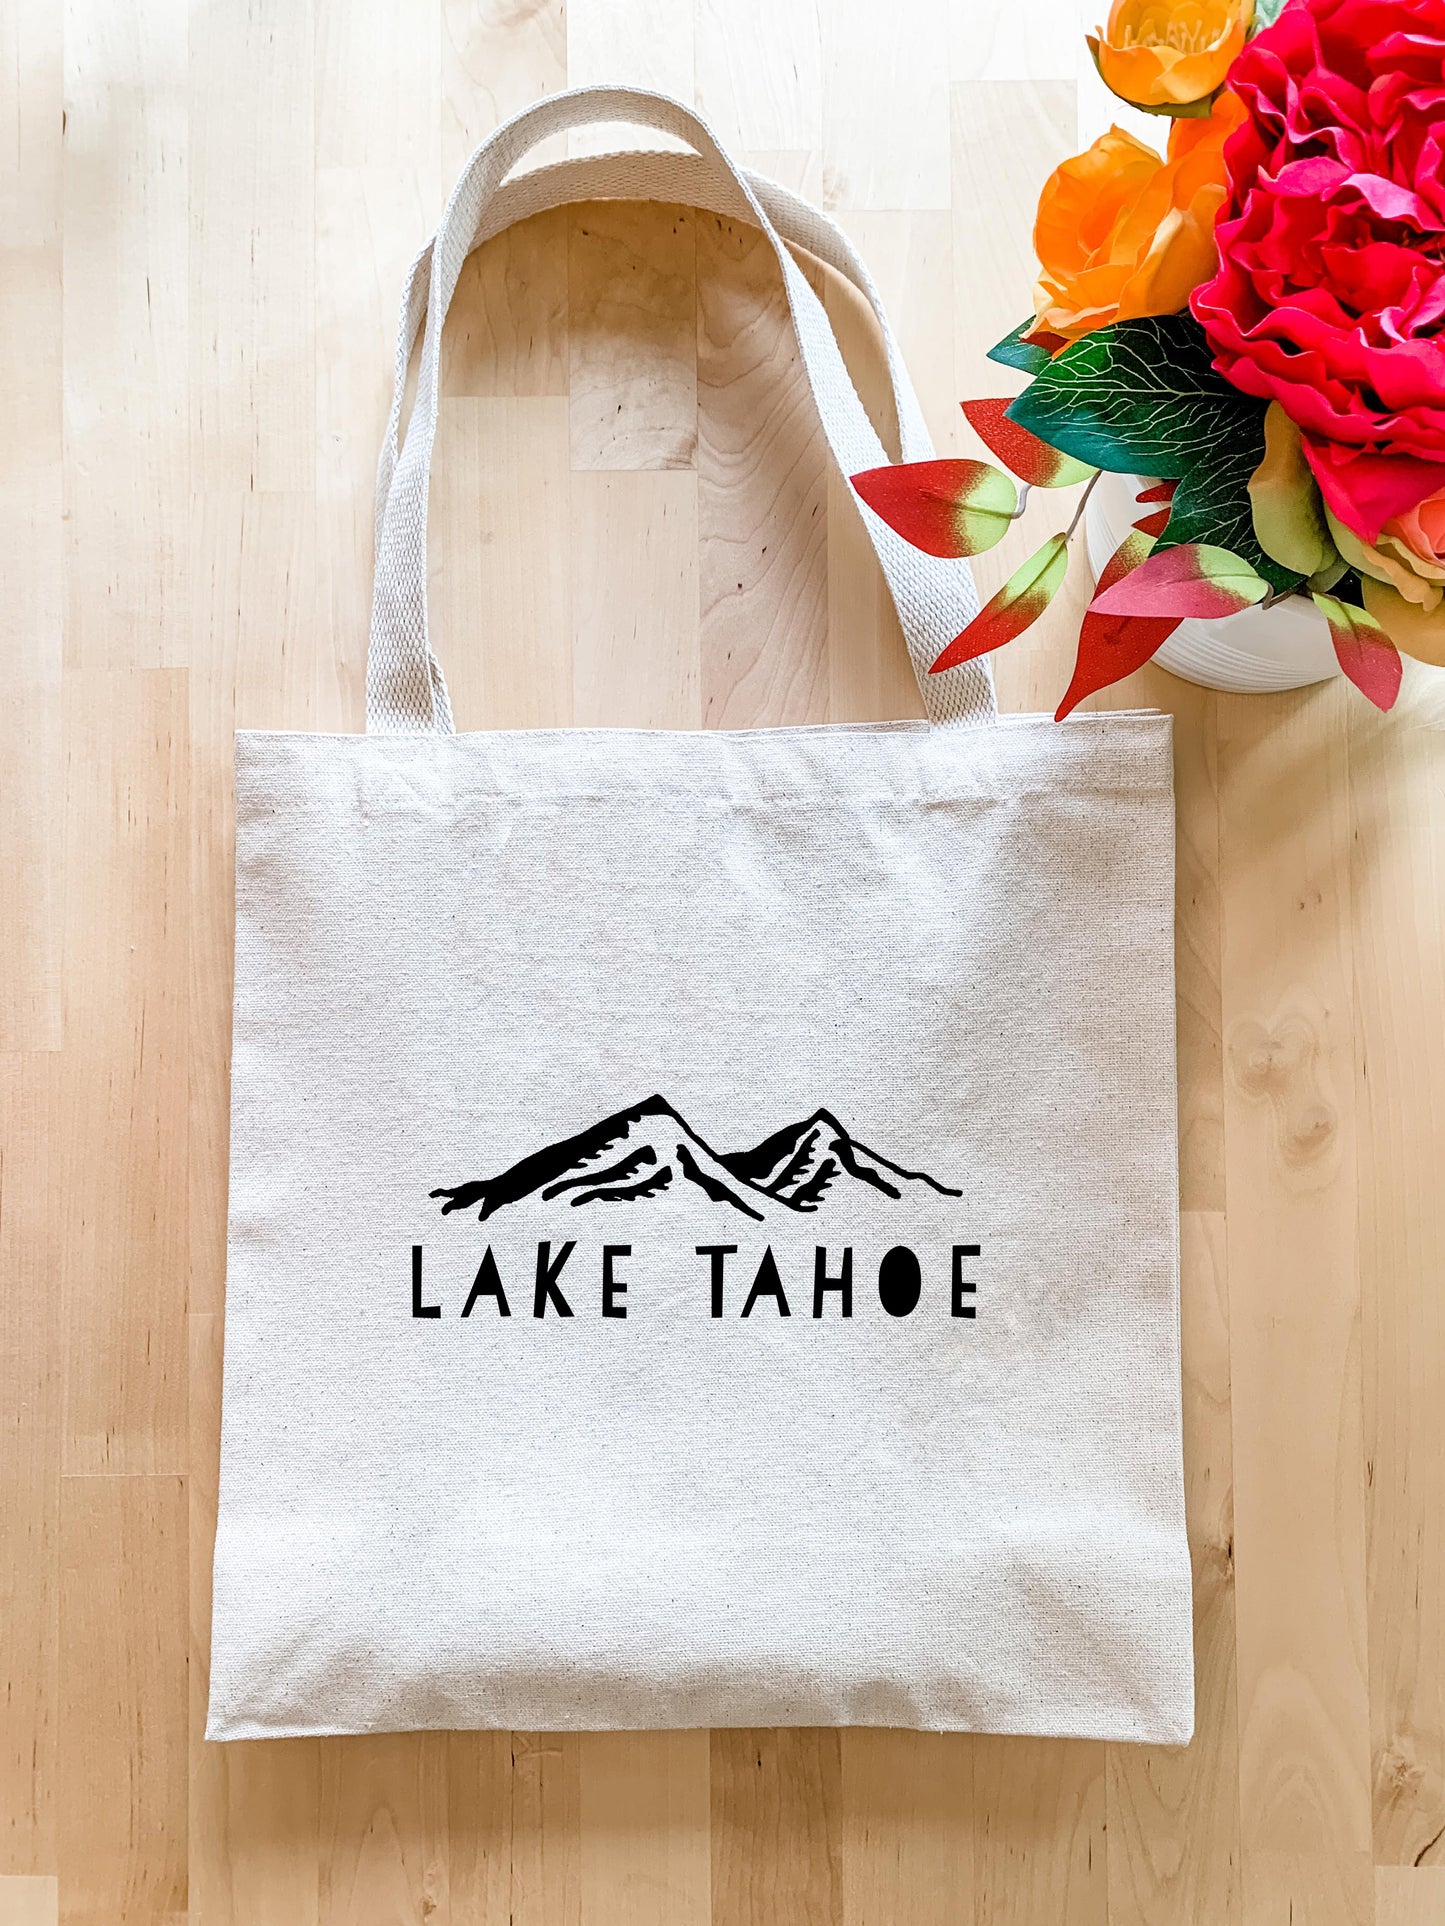 a lake tahoe tote bag next to a bouquet of flowers